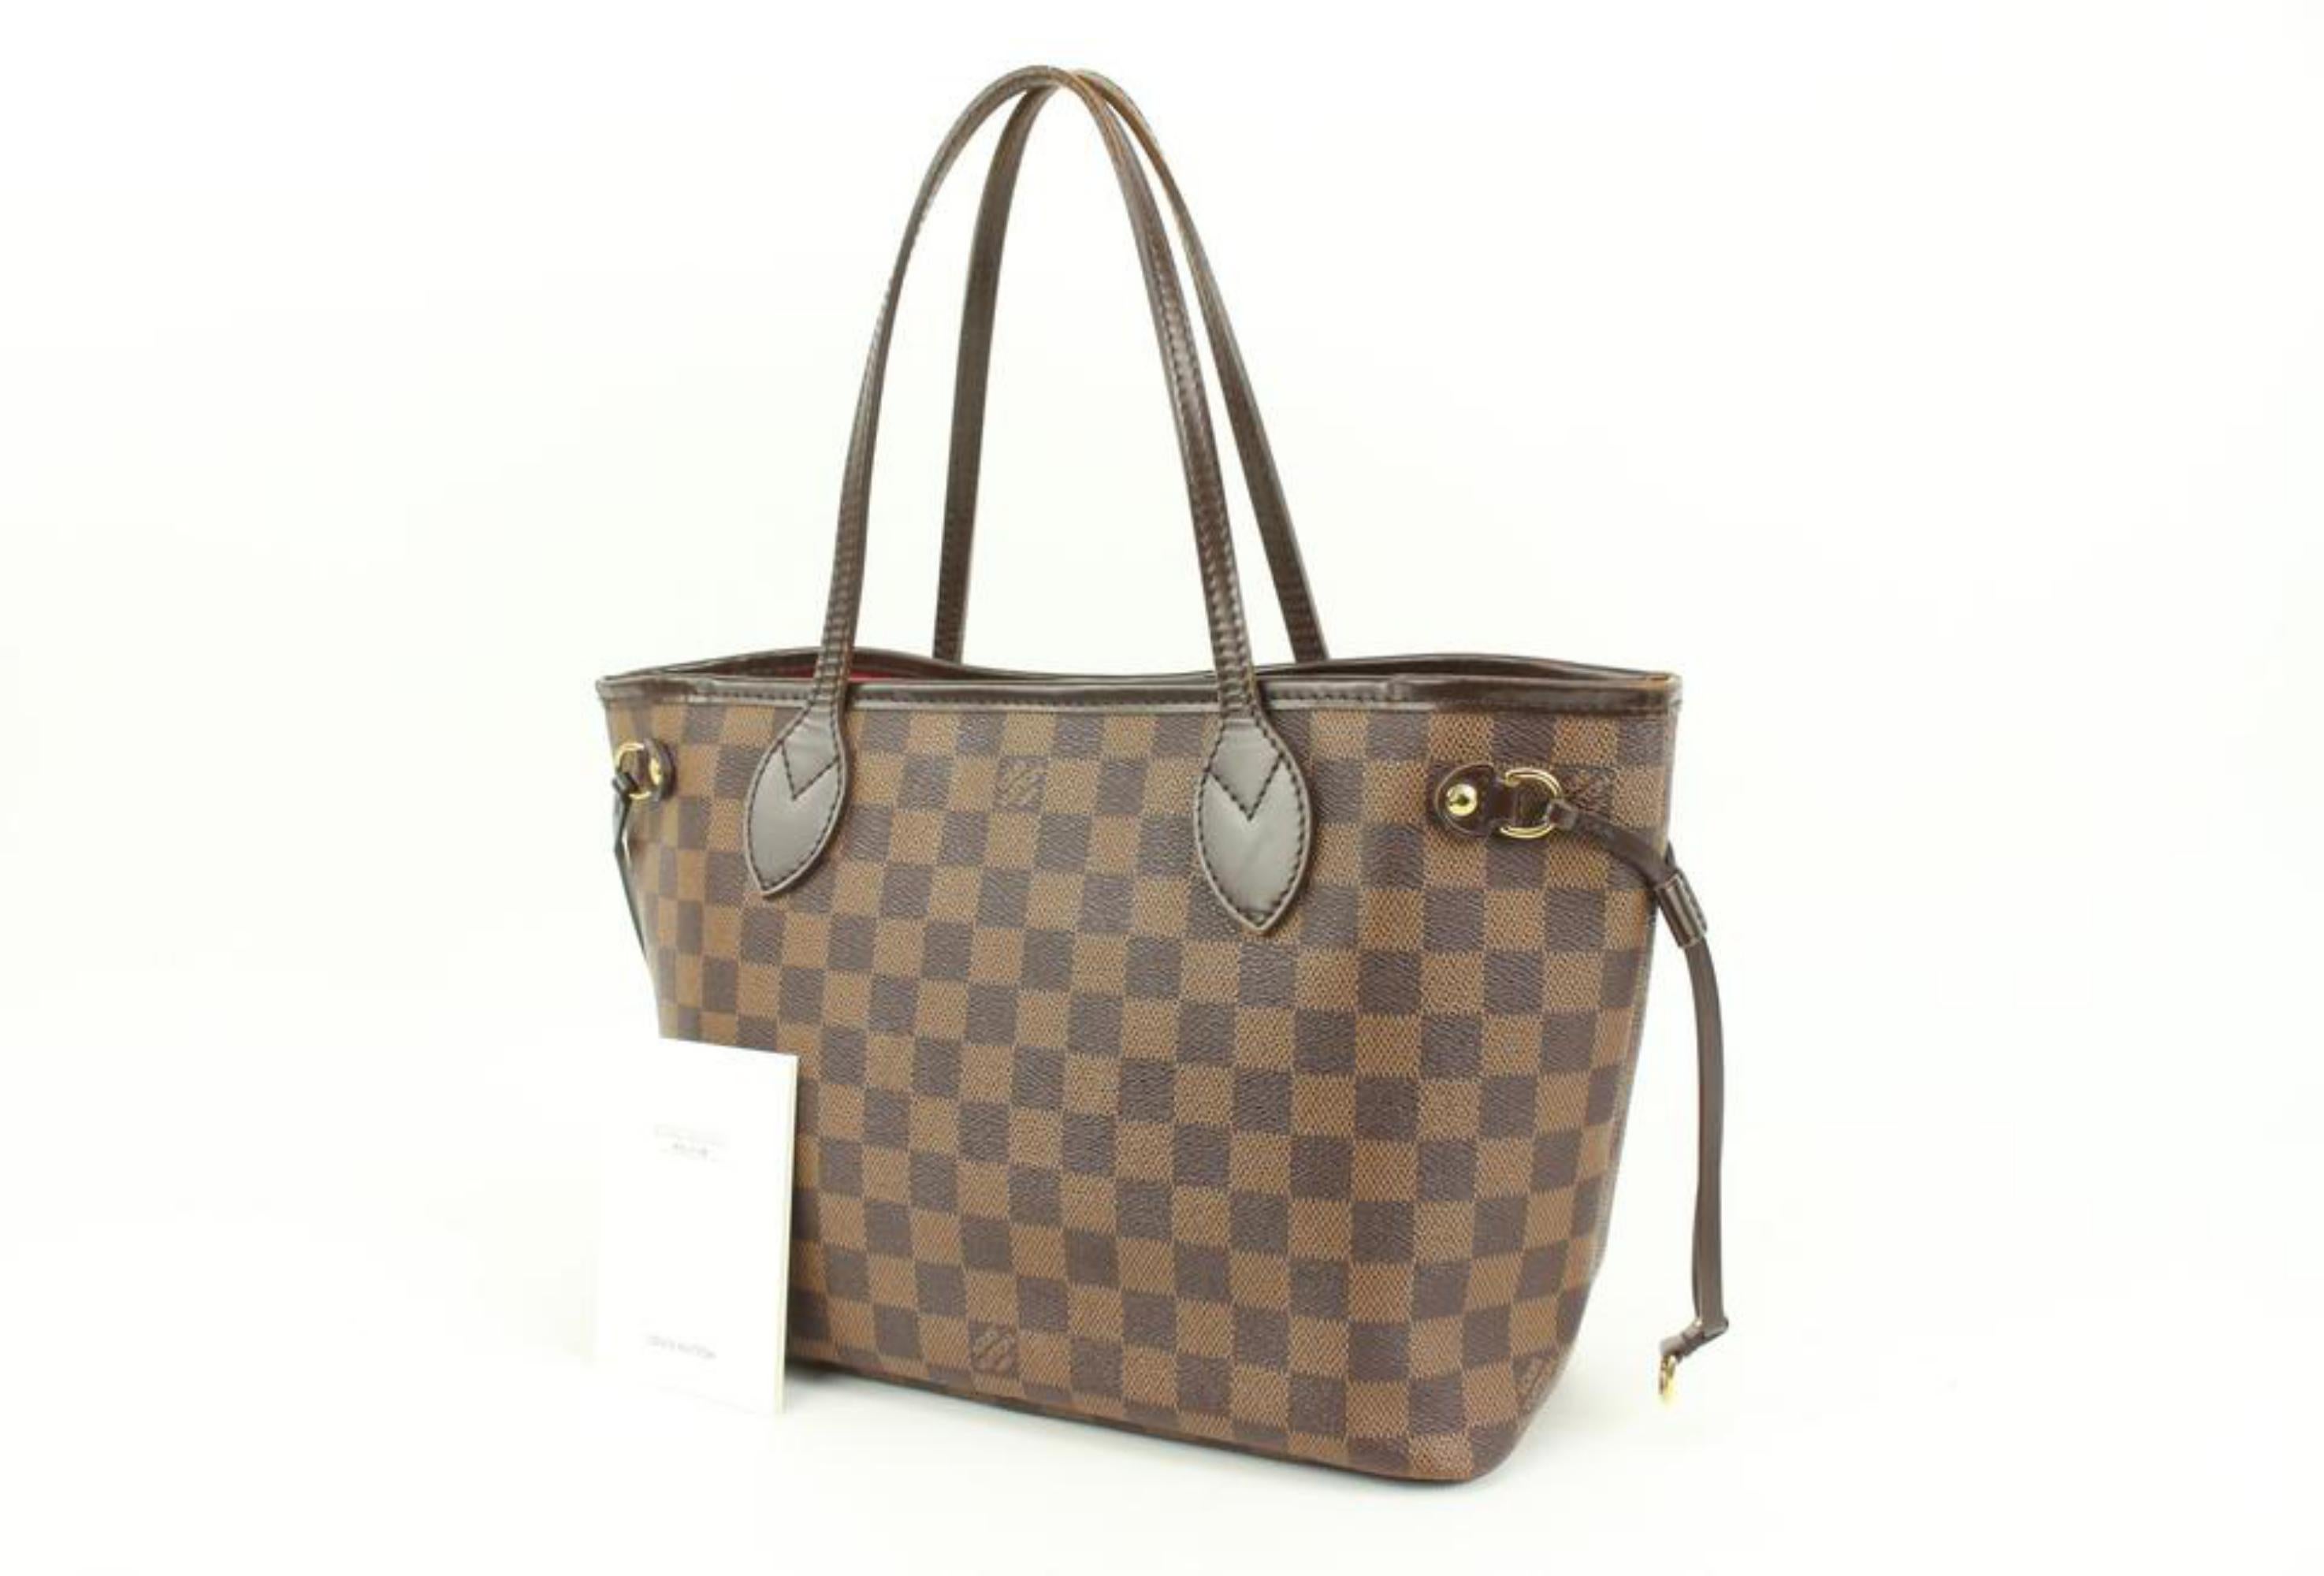 Louis Vuitton Small Damier Ebene Neverfull PM Tote 41lk74
Date Code/Serial Number: AR0152
Made In: France
Measurements: Length:  14.5